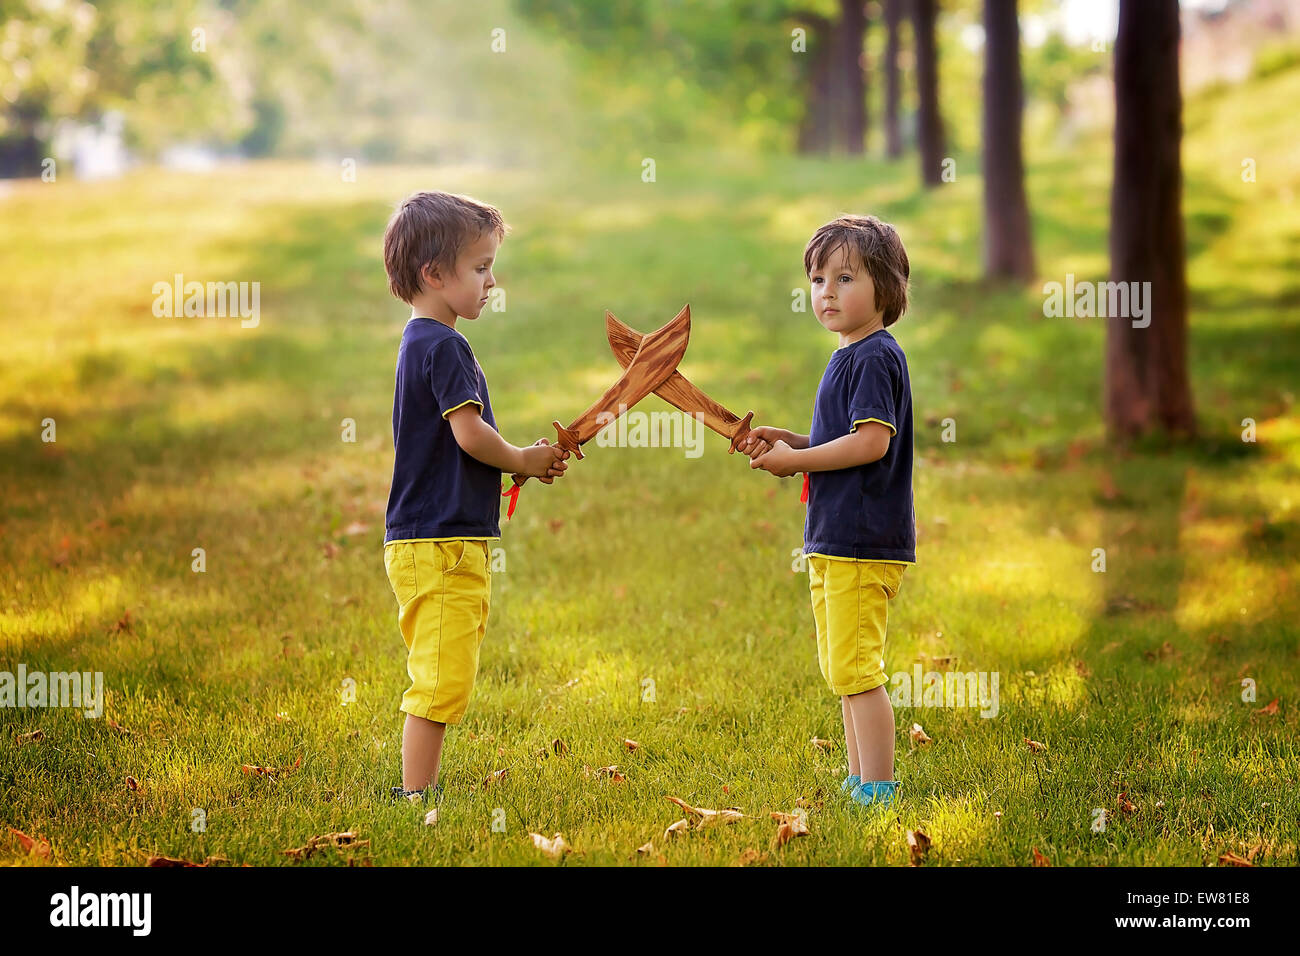 Two Little Boys Holding Swords Glaring With A Mad Face At Each